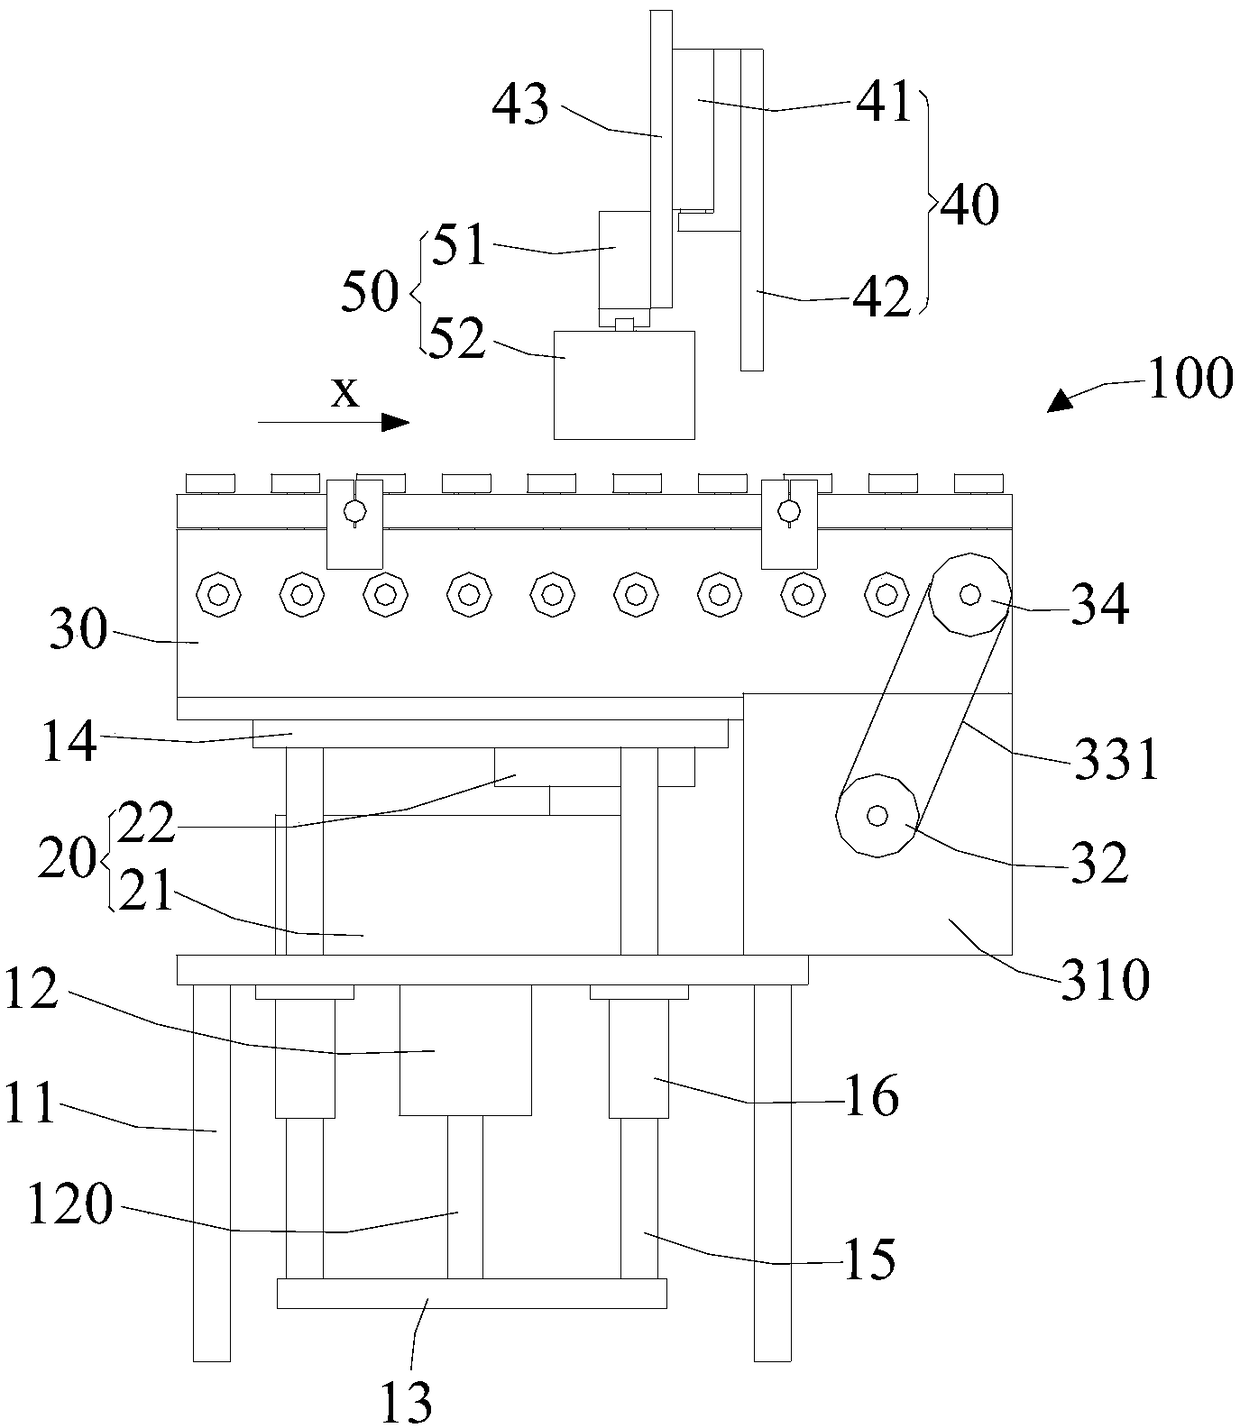 Online type automatic weighing device and method thereof